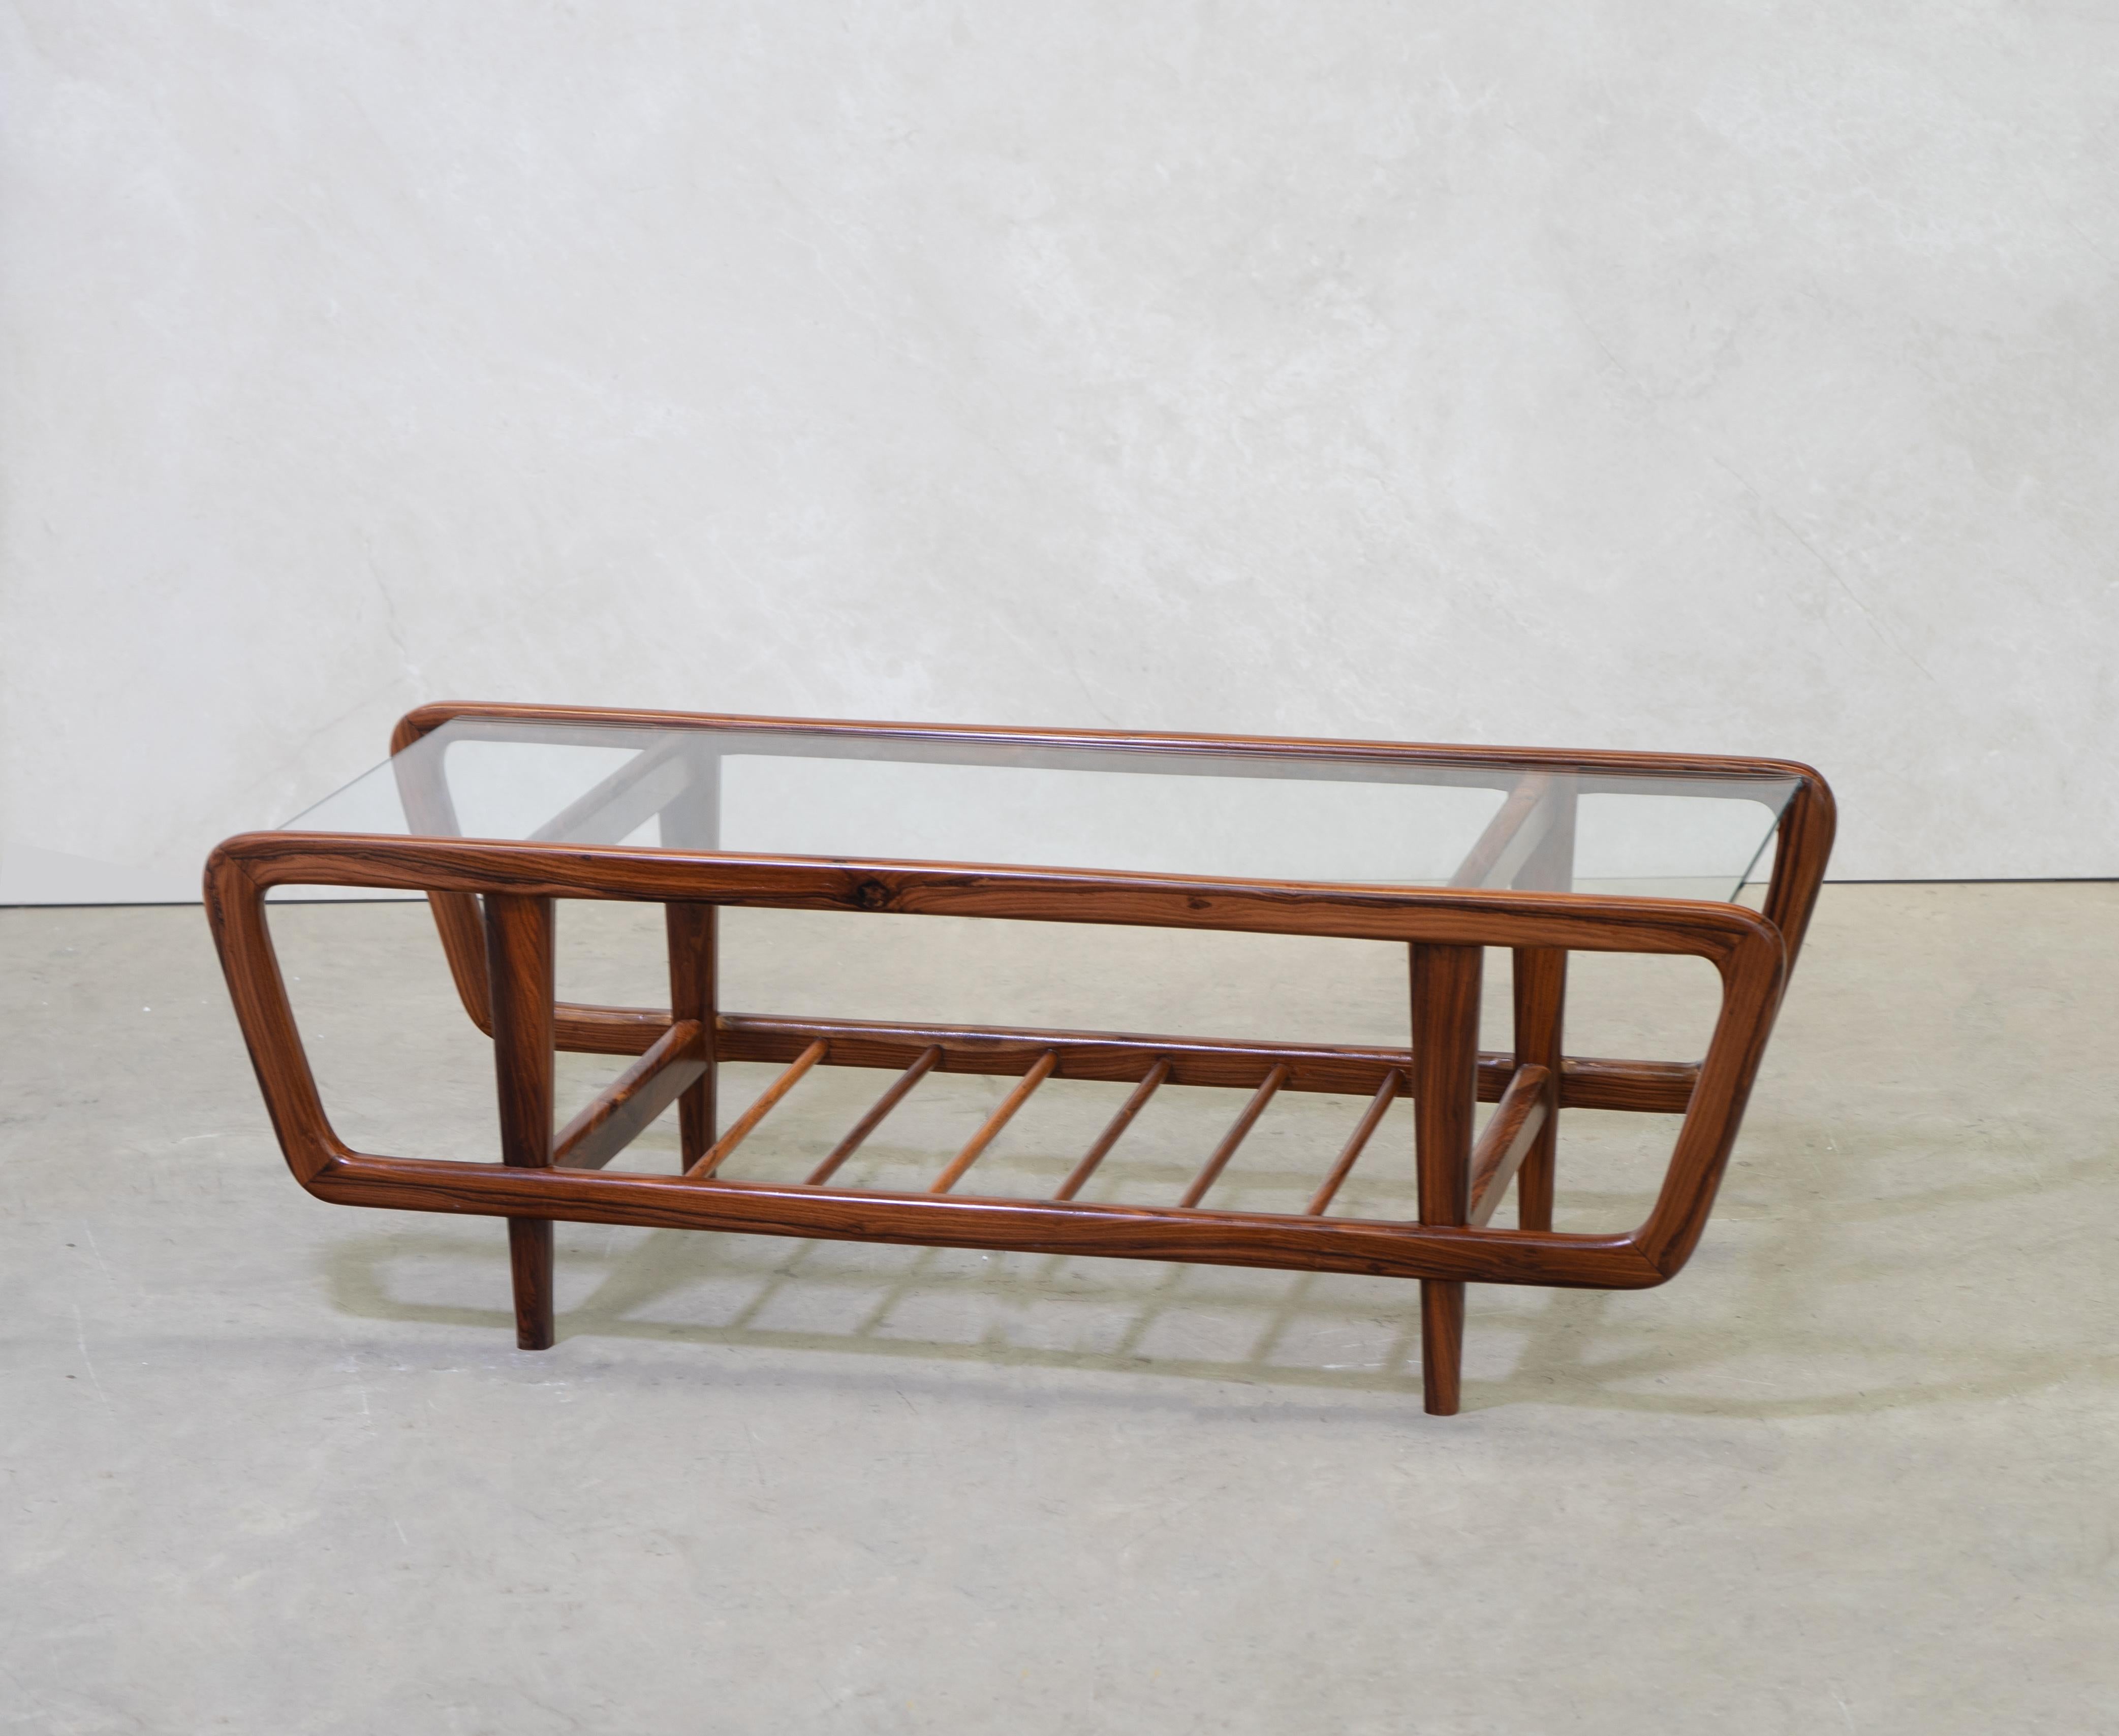 Hand-Carved Coffee Table by Giuseppe Scapinelli, Brazilian Mid Century ModernDesign